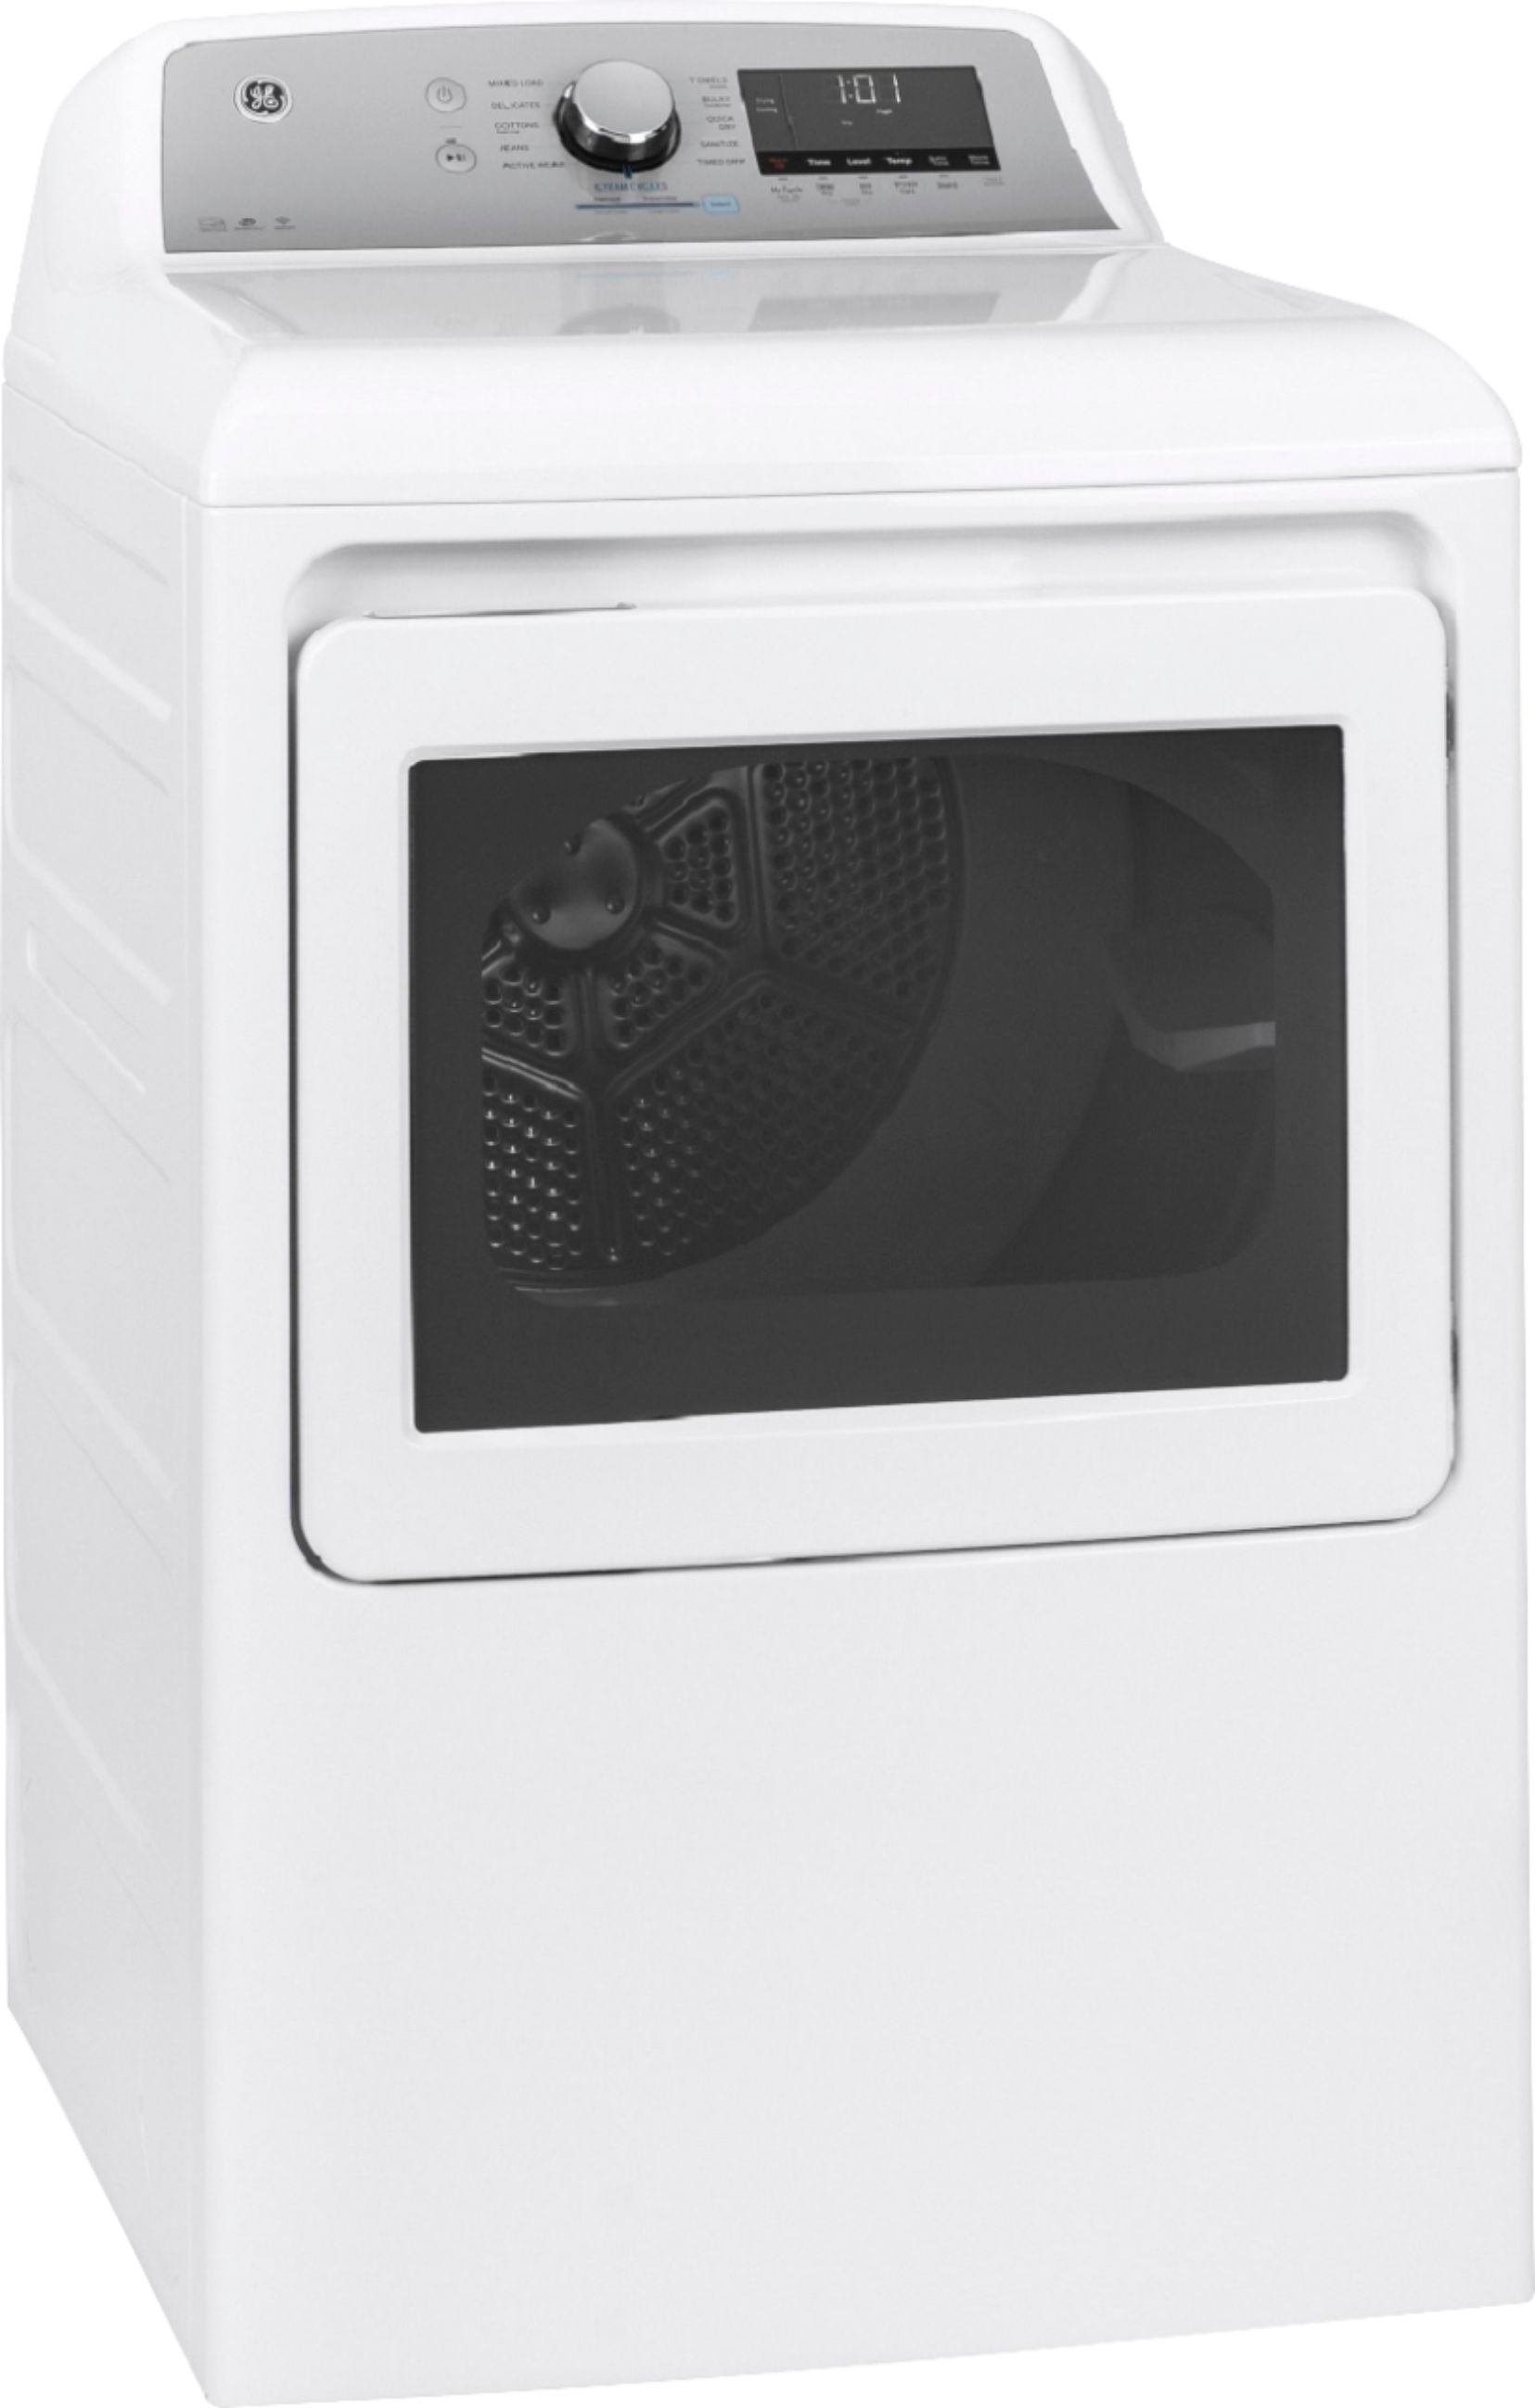 Angle View: GE - 7.4 Cu. Ft. 13-Cycle Gas Dryer with Steam - White On White With Silver Backsplash